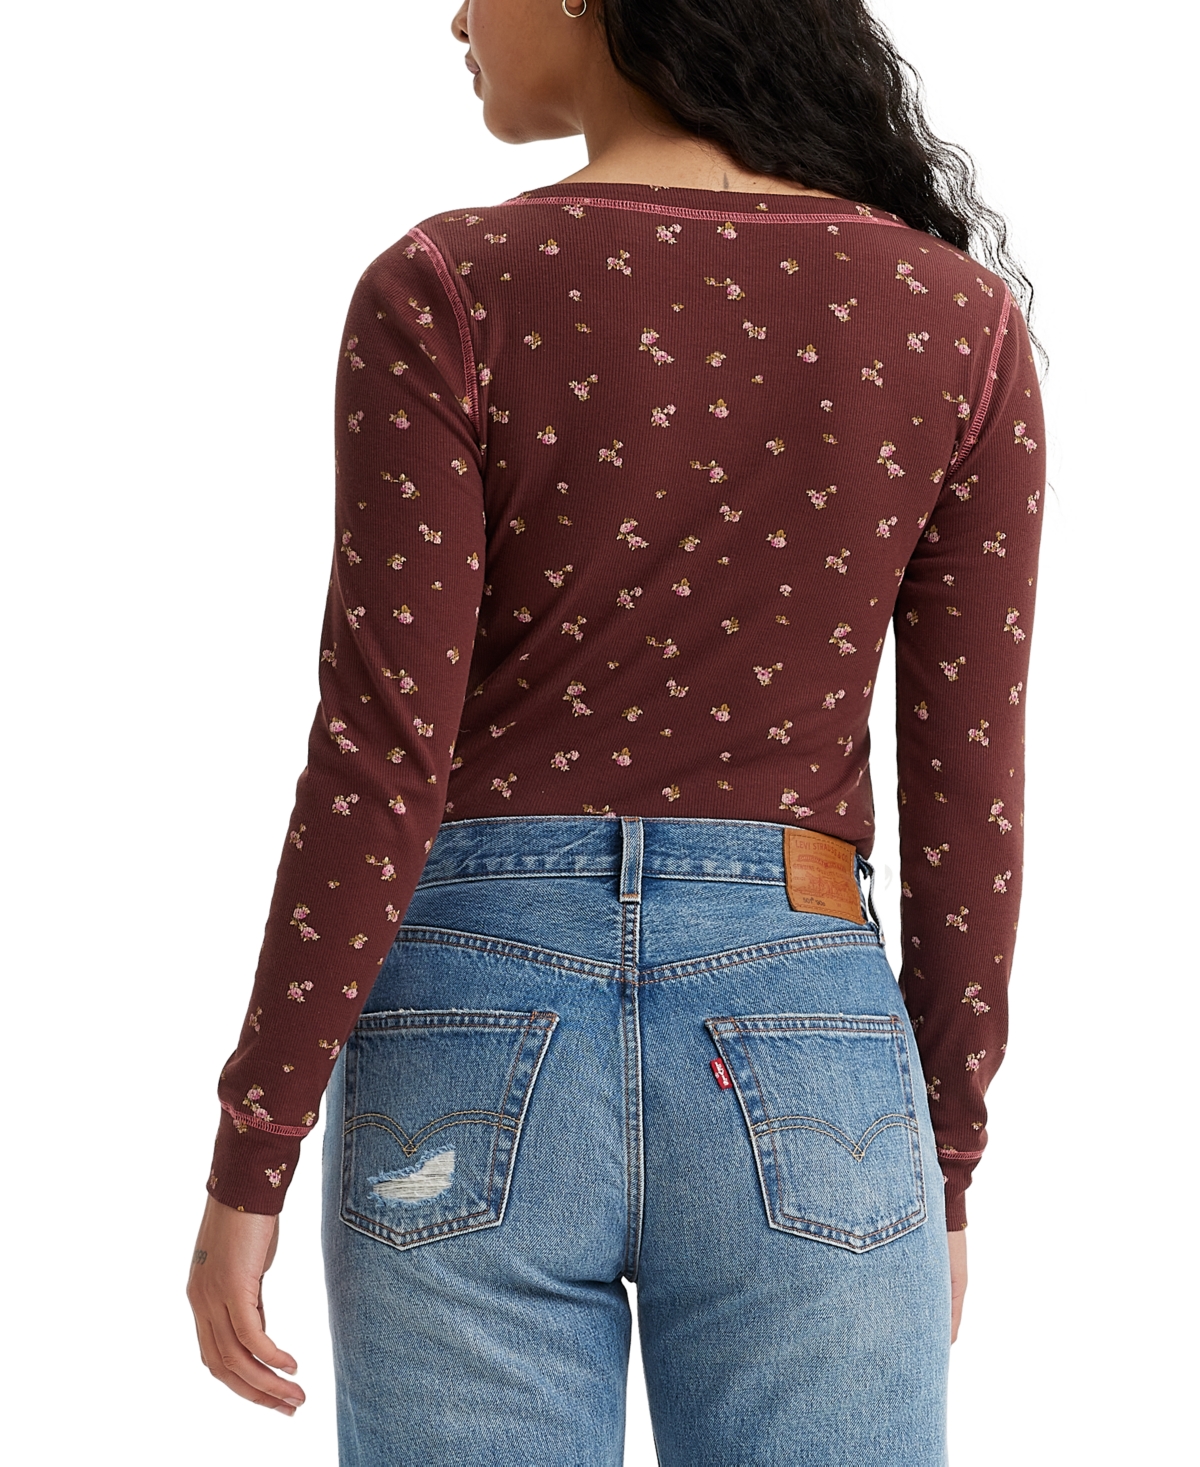 Levi's Women's Sierra Waffle-knit Quarter-button Henley Top In Shayla Floral Decadent Chocolate